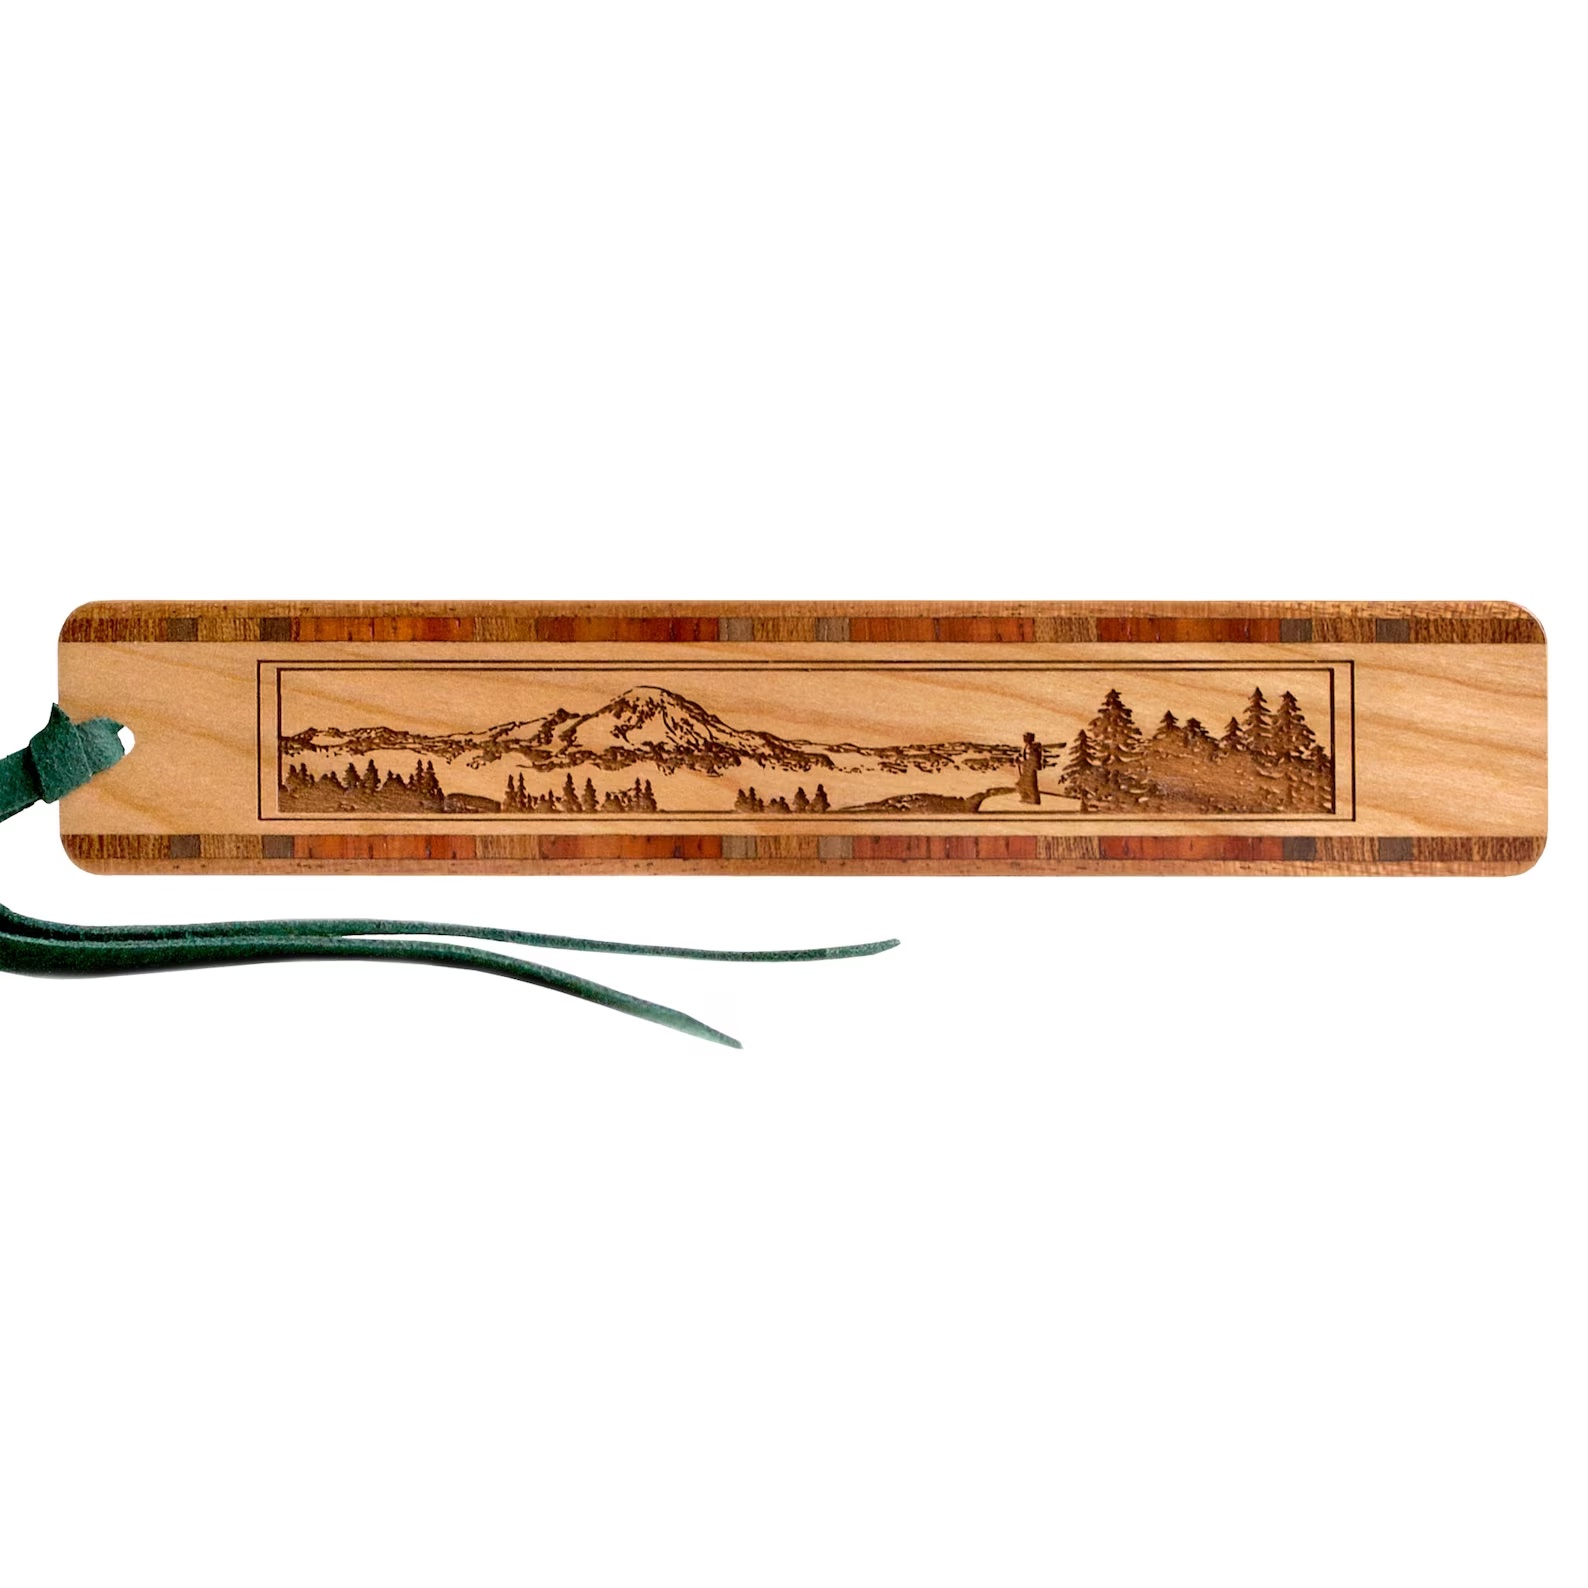 A photo of a wooden bookmark carves with a mountain scene on the front of it.